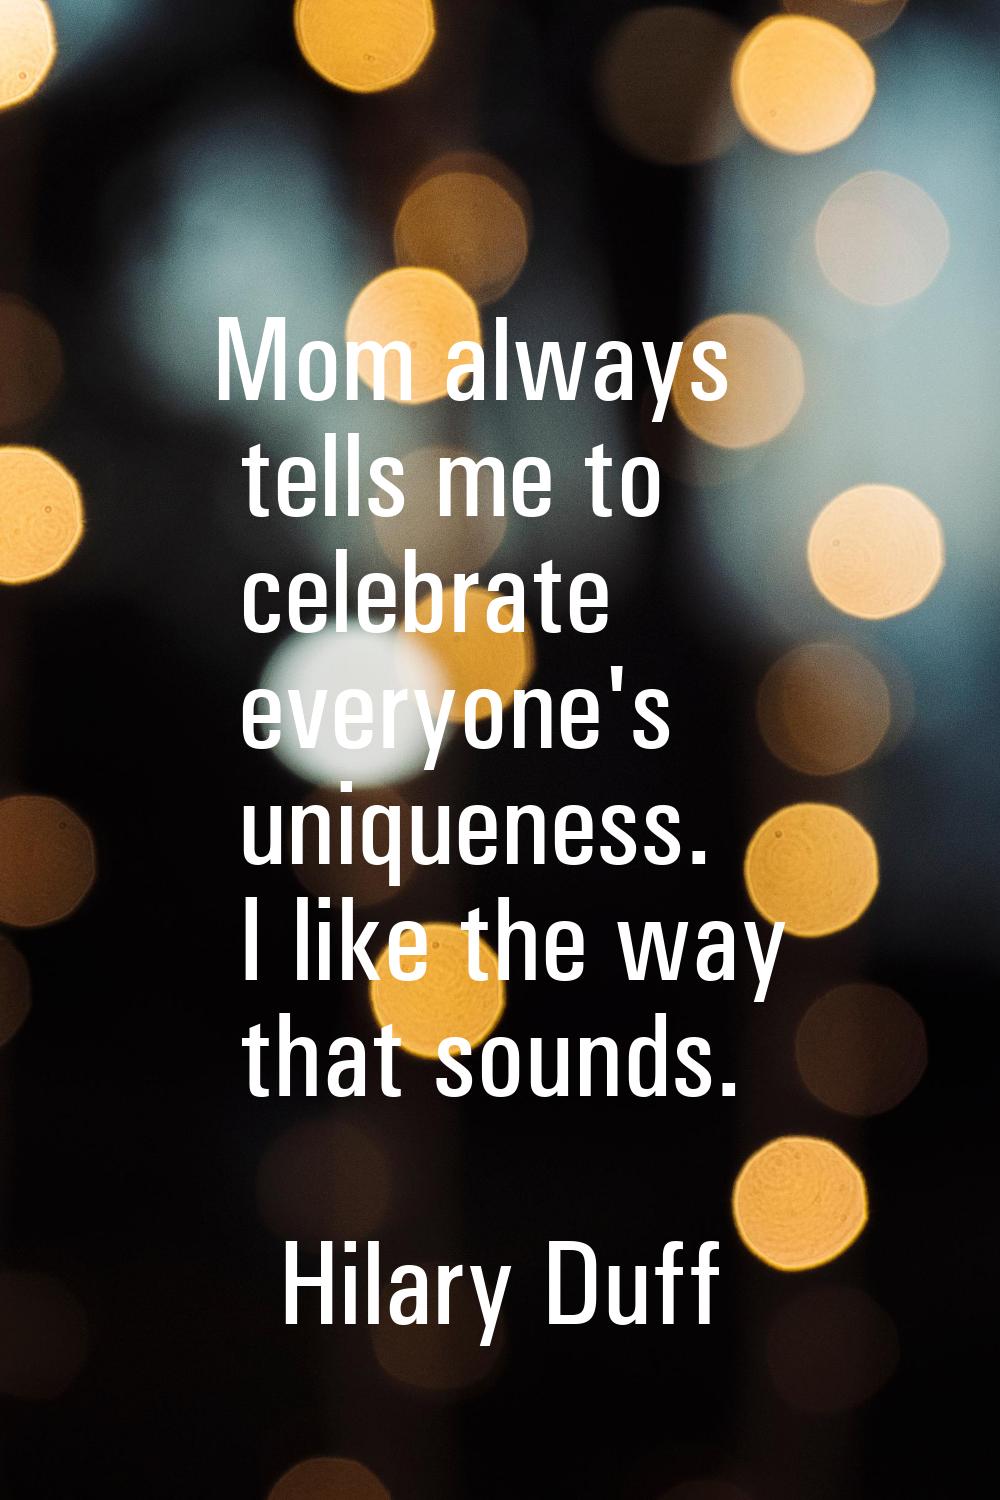 Mom always tells me to celebrate everyone's uniqueness. I like the way that sounds.